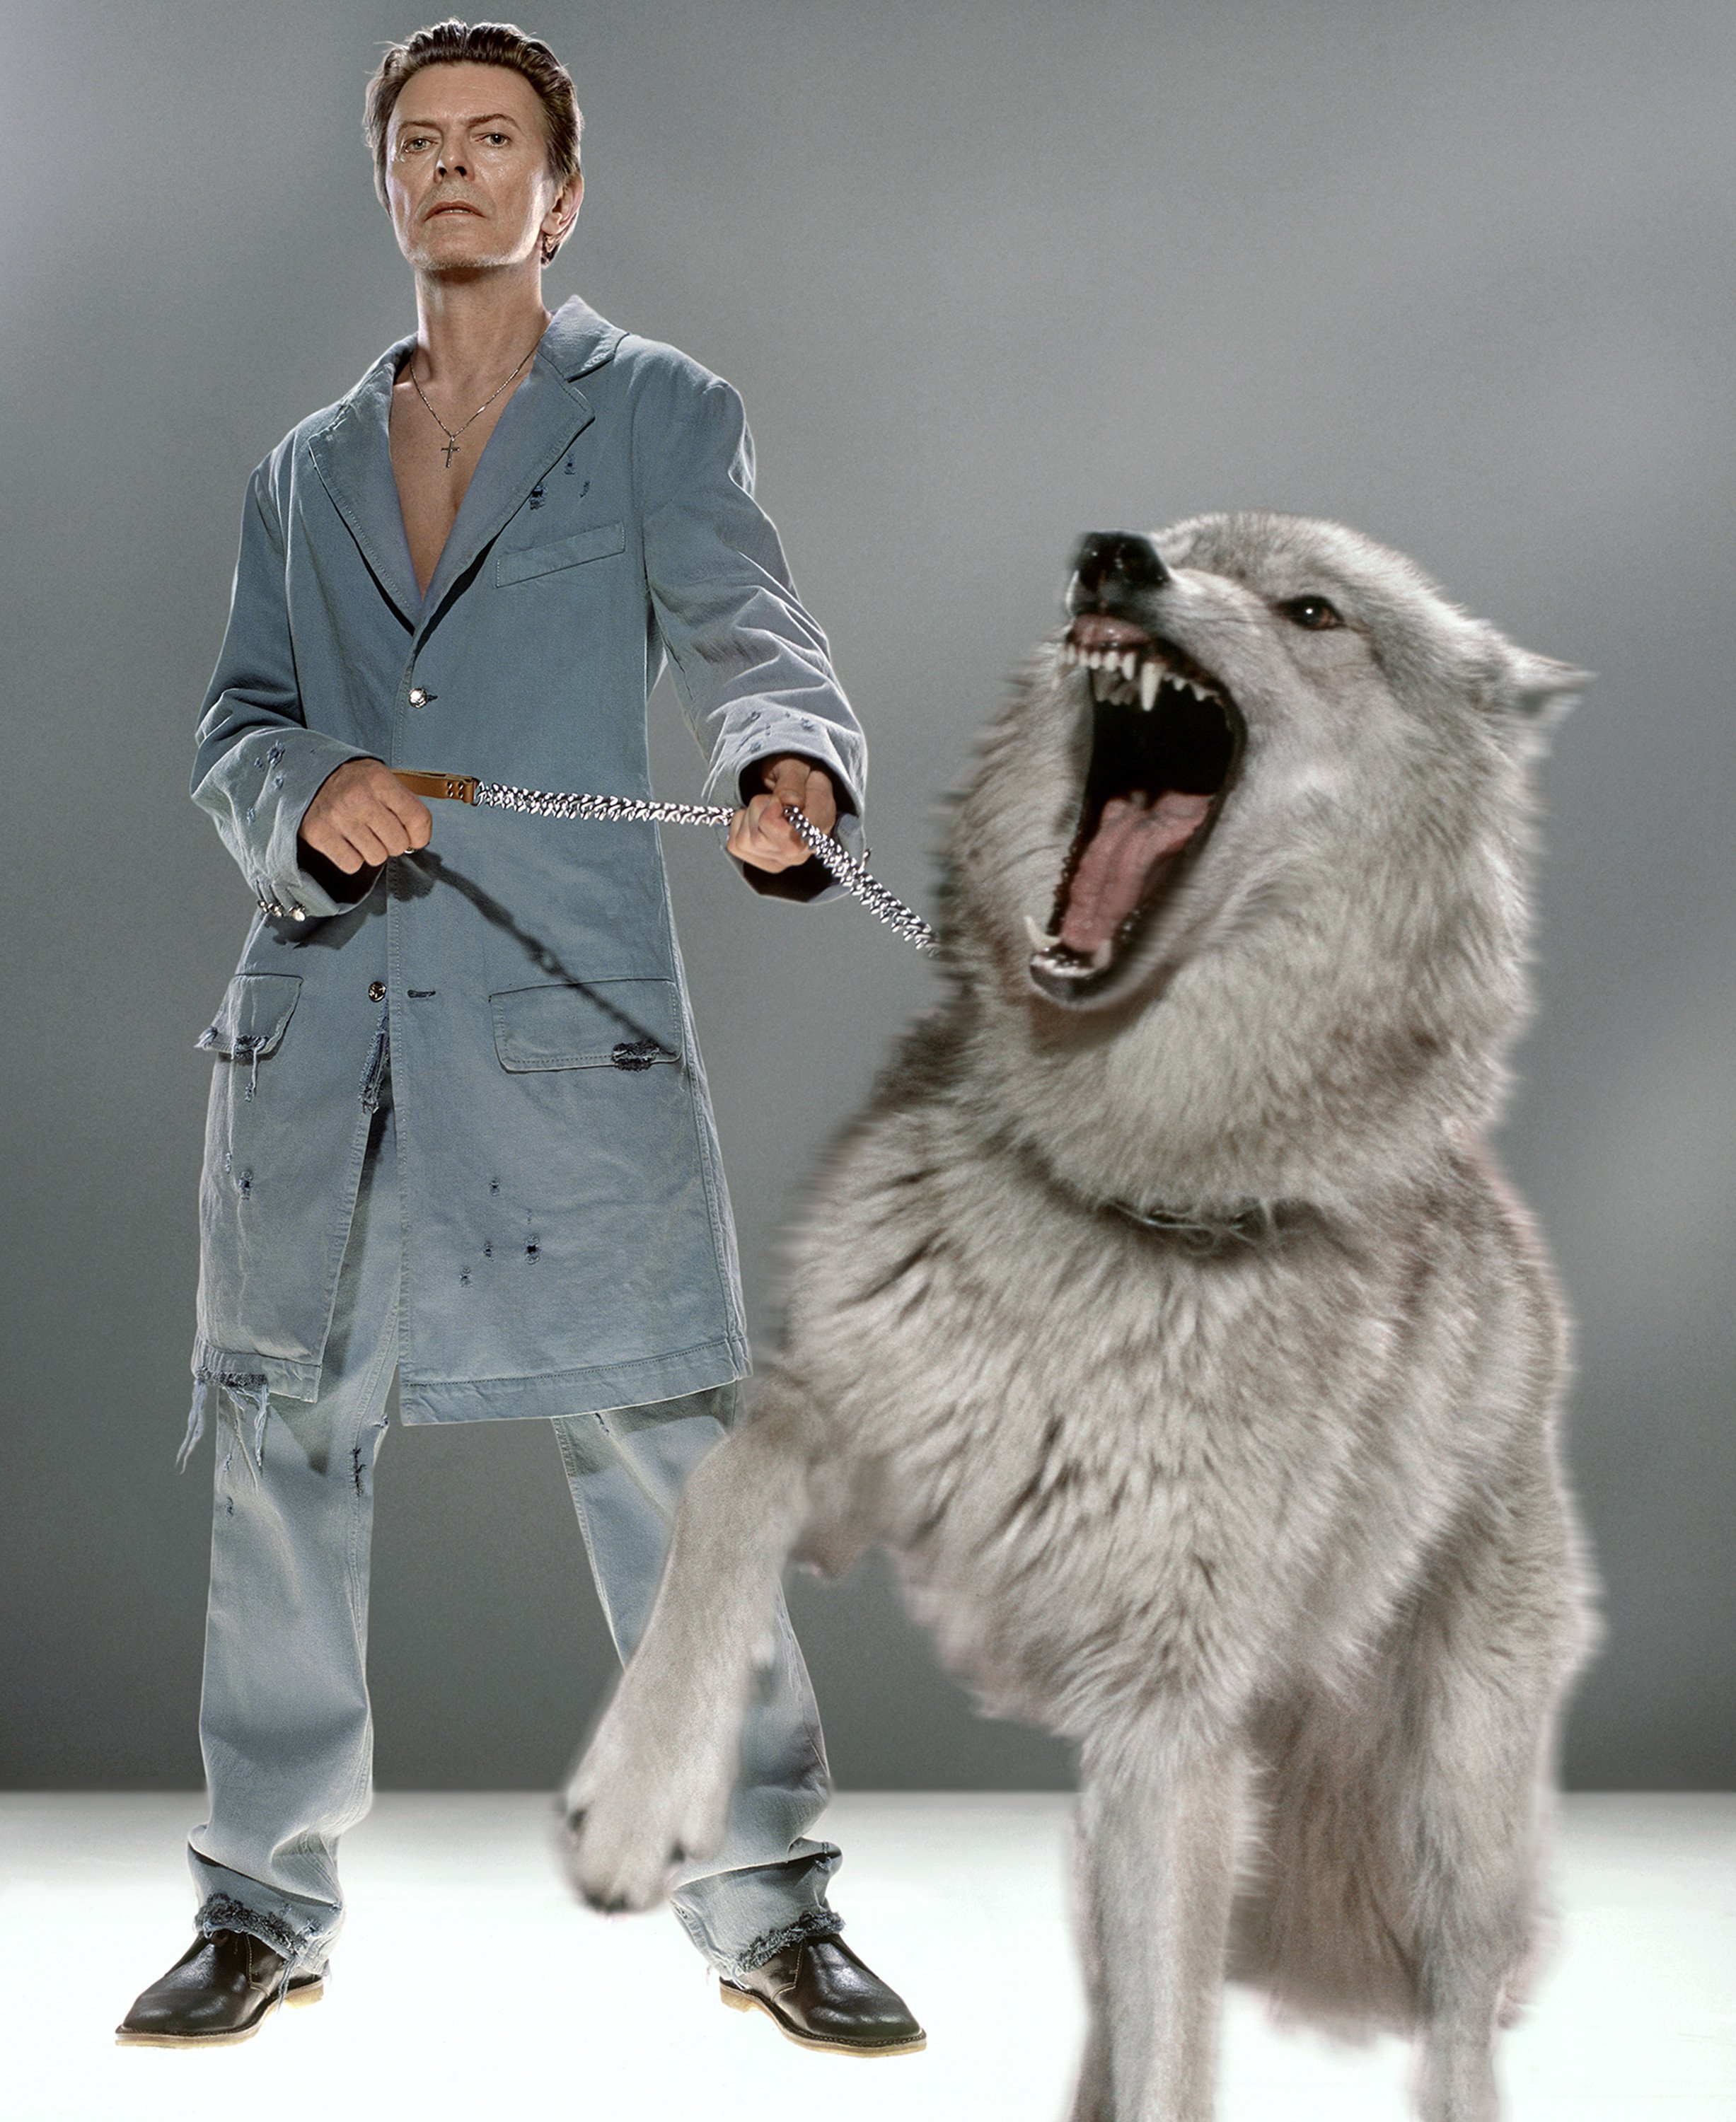 David Bowie with Wolves